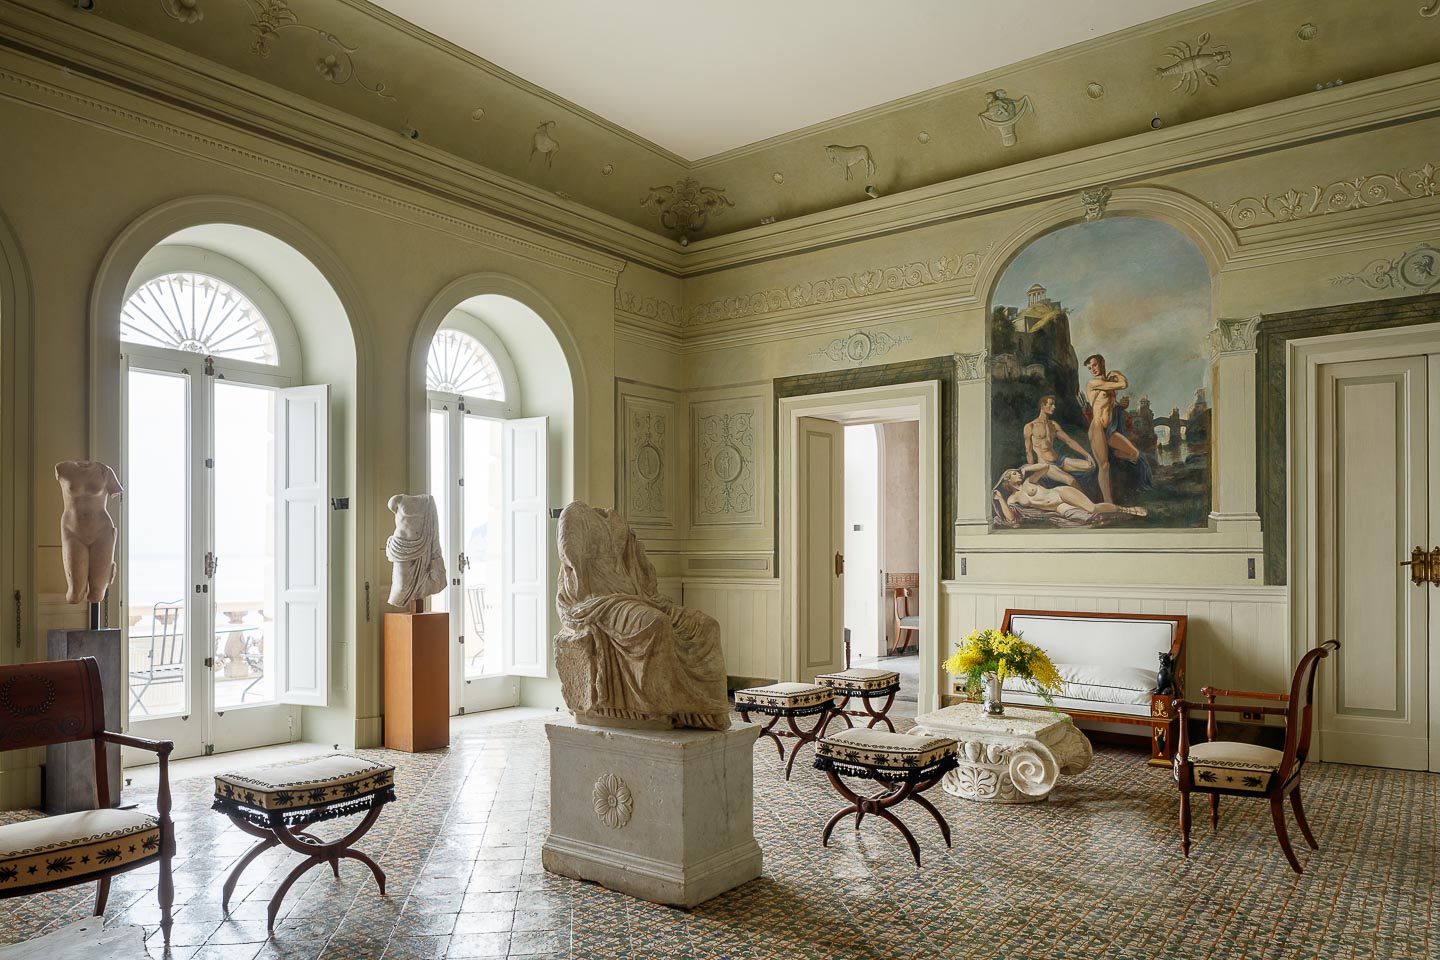 Villa Astor Sorrento luxury home accommodation reception area salon Farfalle fresco neoclassical style The Heritage Collection exclusive rent rental weddings events